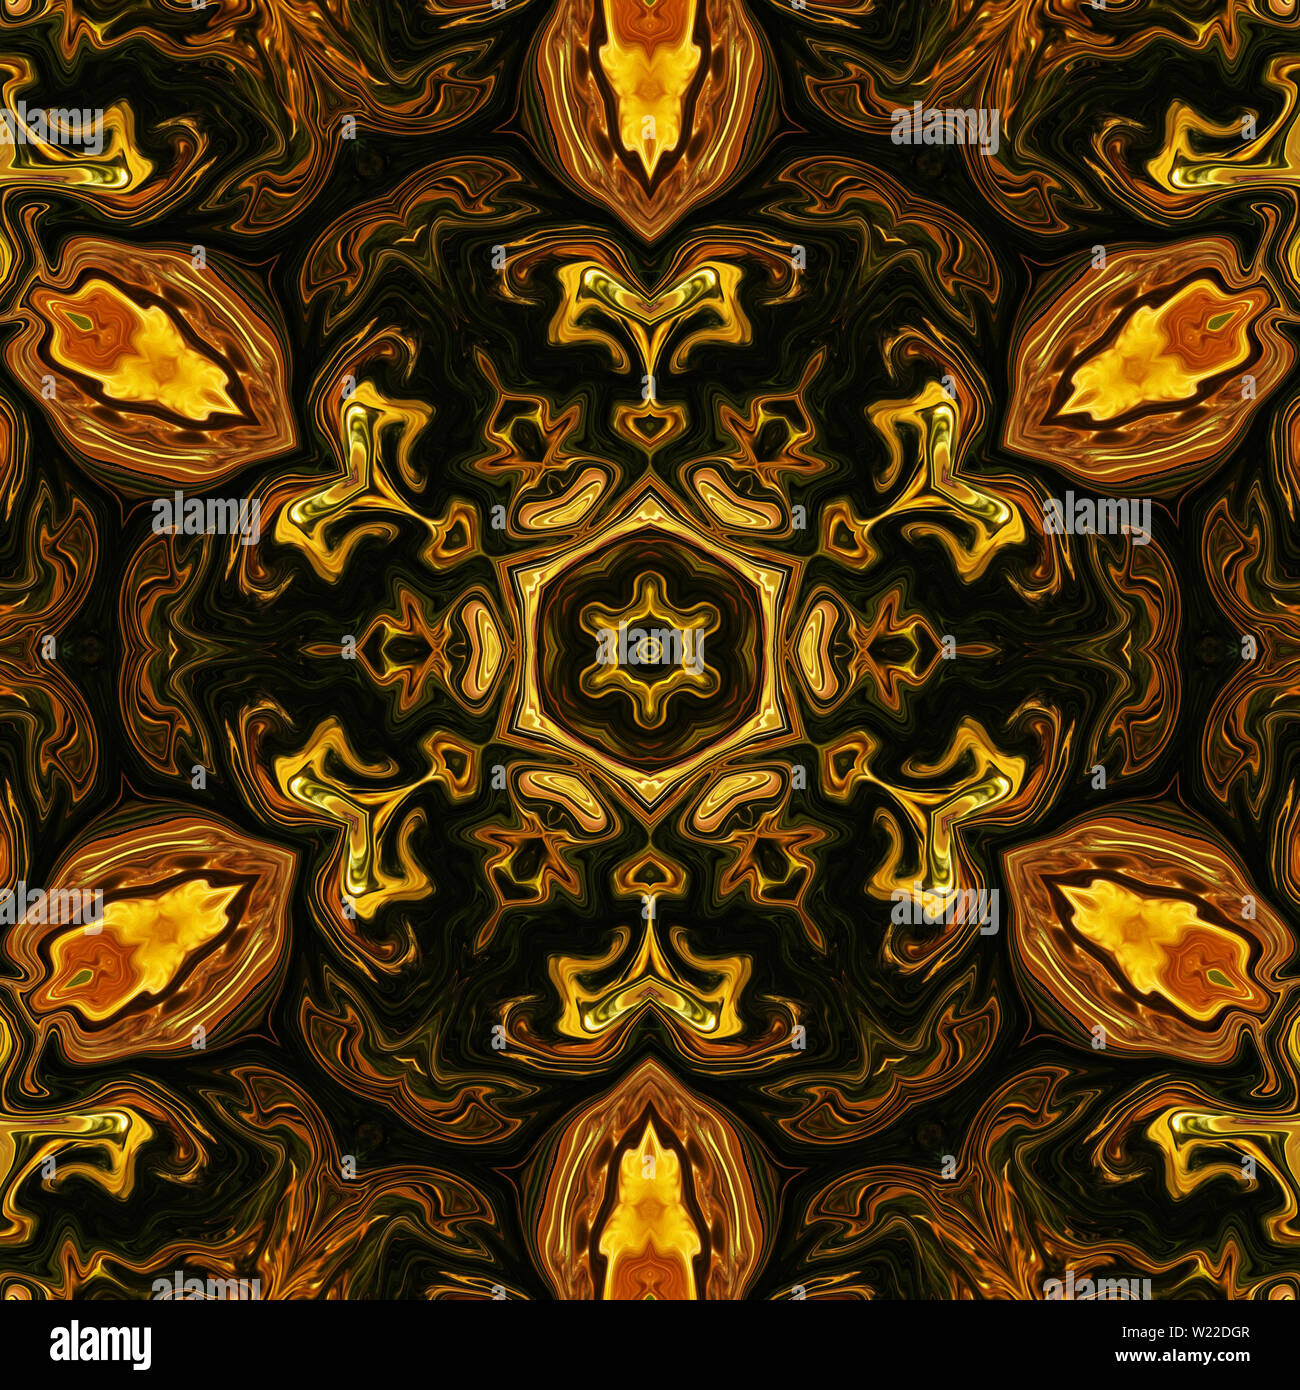 Liquid gold effect oil painting artwork. Creative luxury design. Golden colors pattern background. Stock Photo